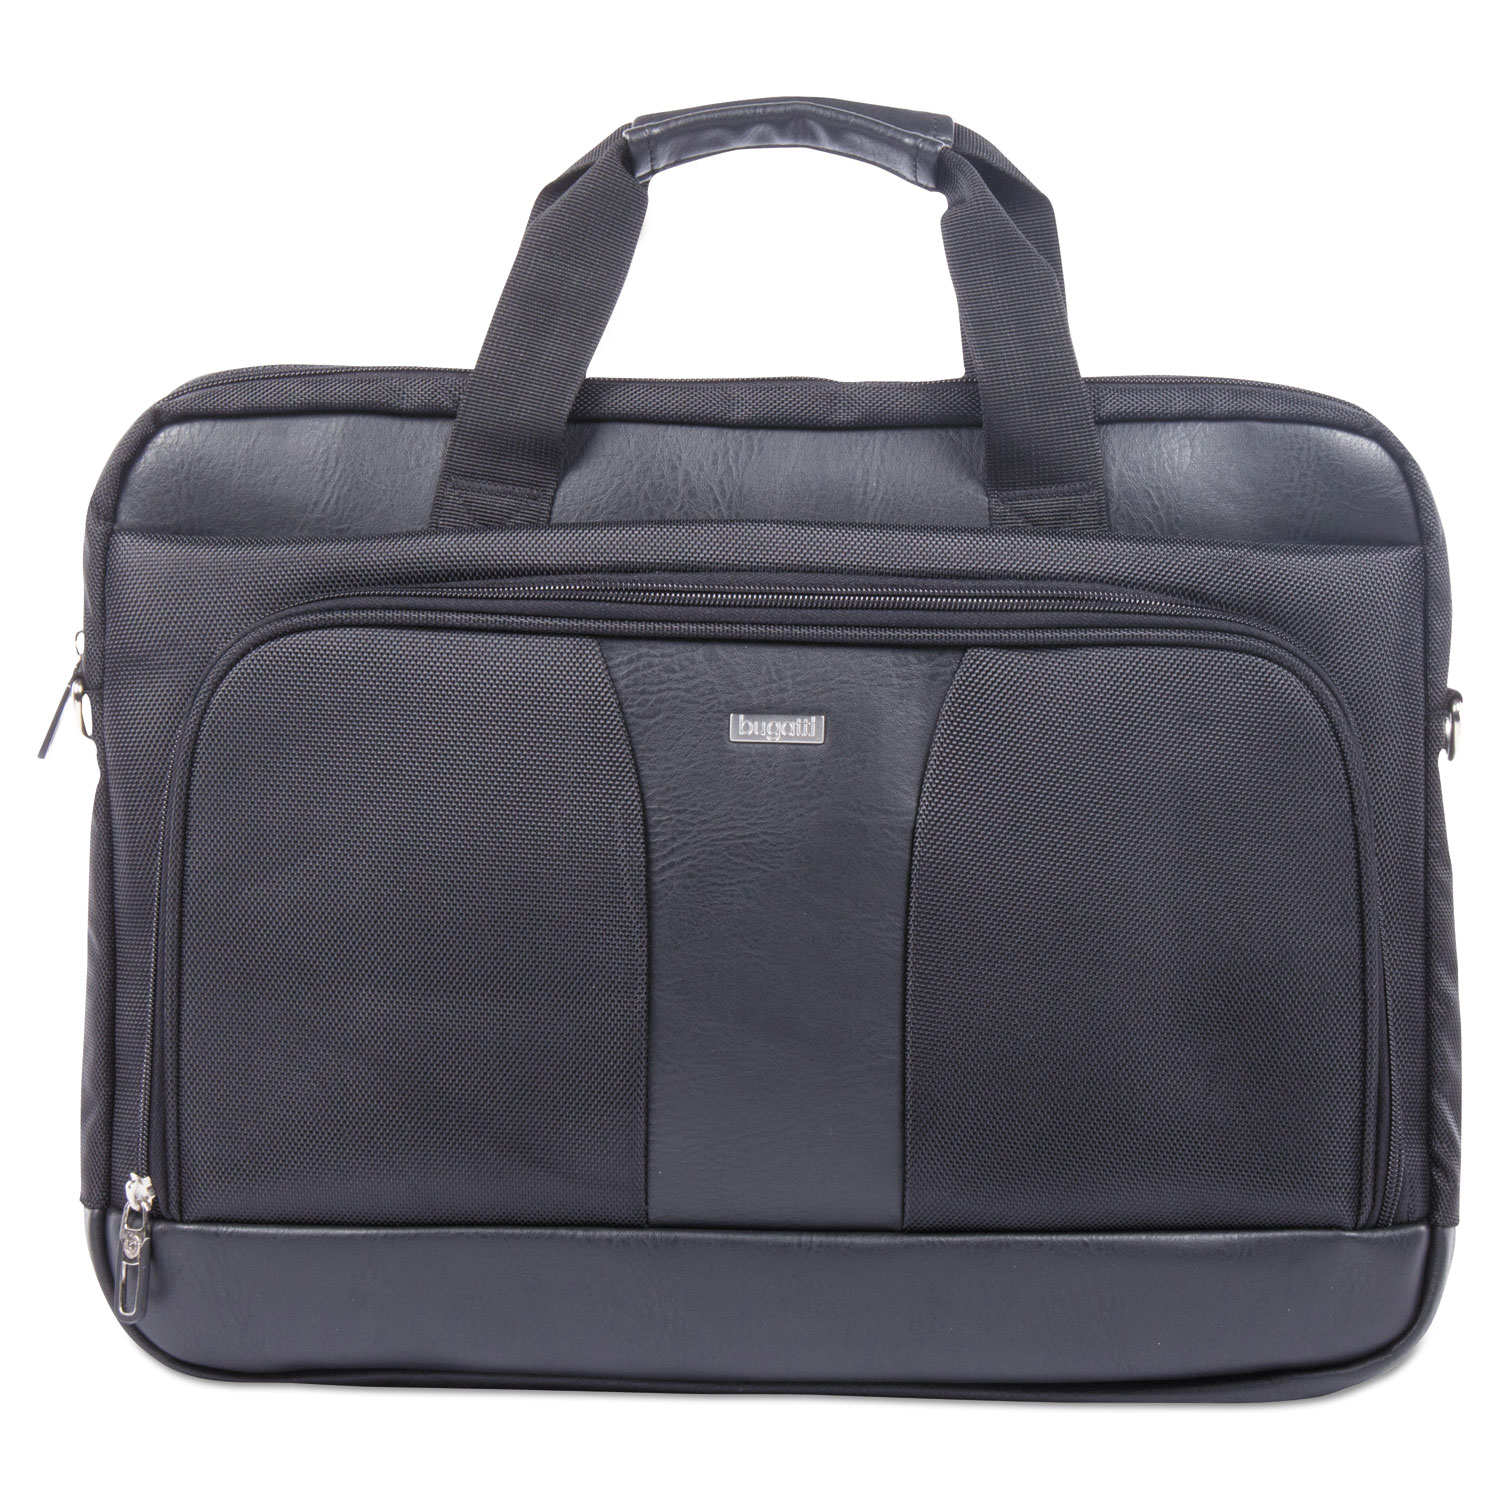 Gregory Executive Briefcase, 18 x 9 x 18, Nylon/Synthetic Leather, Black